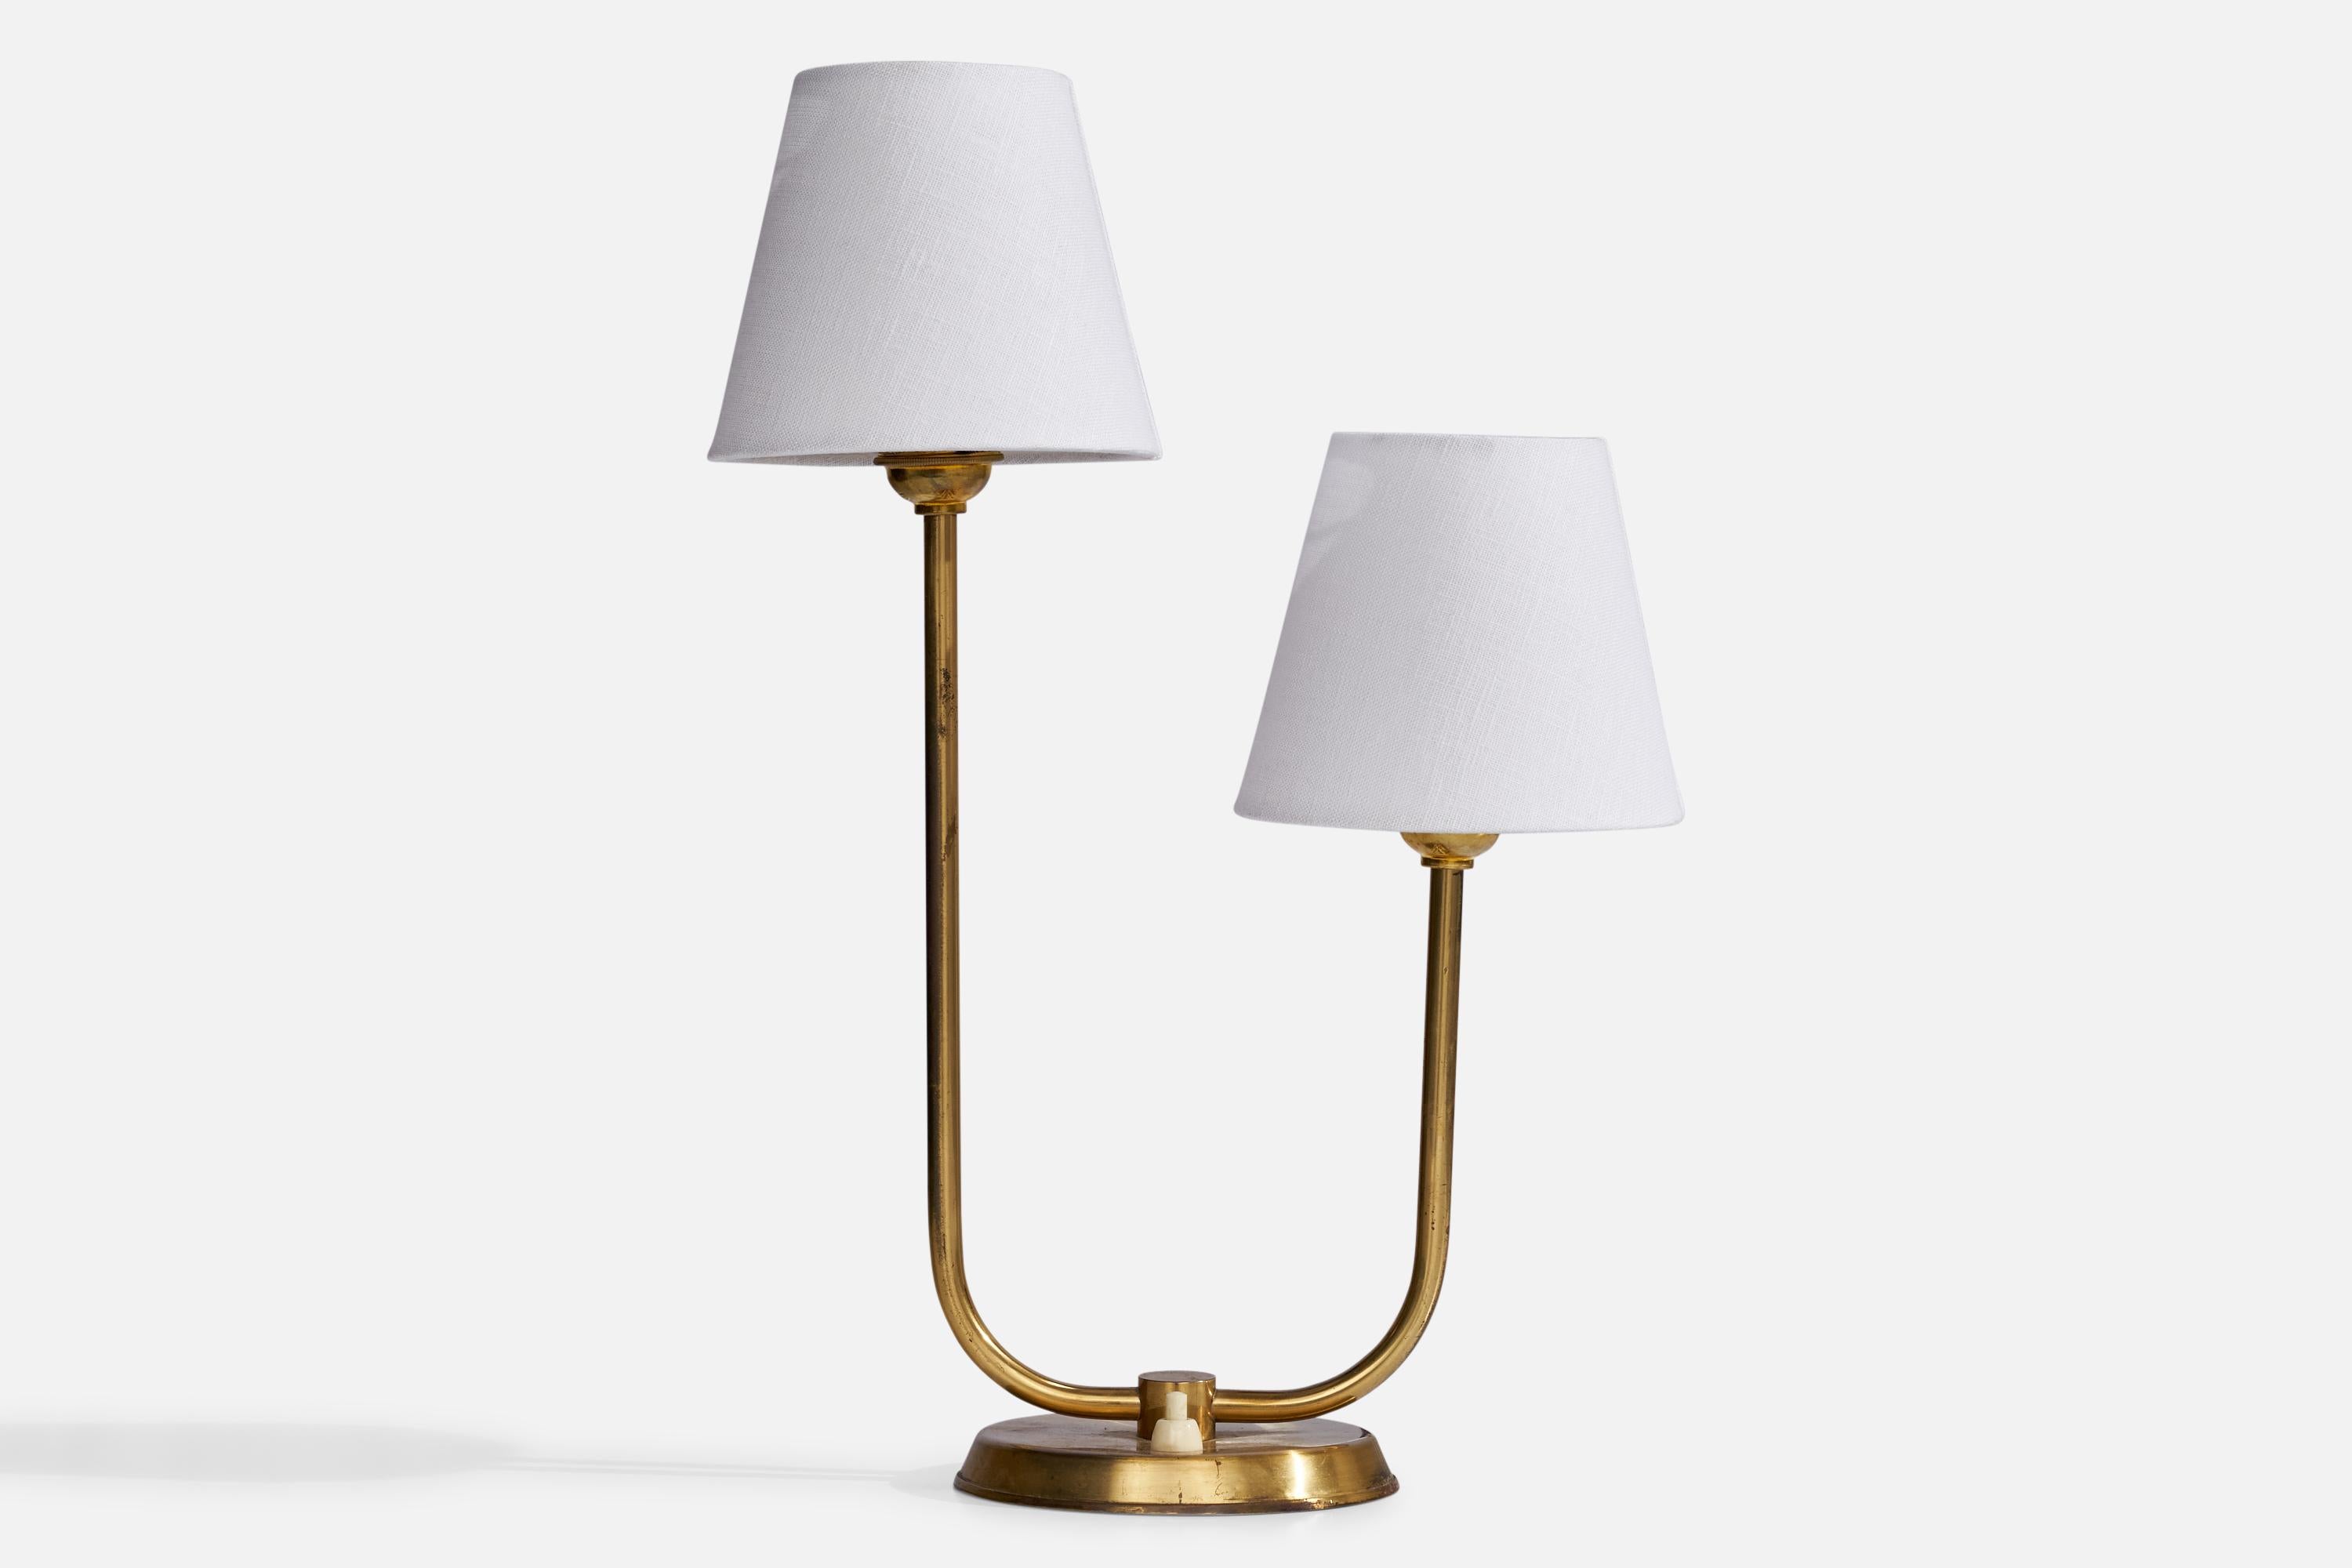 A two-armed brass and white fabric table lamp designed and produced in Sweden, 1940s.

Dimensions of Lamp (inches): 13.3” H x 7.25” W x 5.15” Depth
Dimensions of Shade (inches): 3”  Top Diameter x 5” Bottom Diameter x 4.5” H
Dimensions of Lamp with